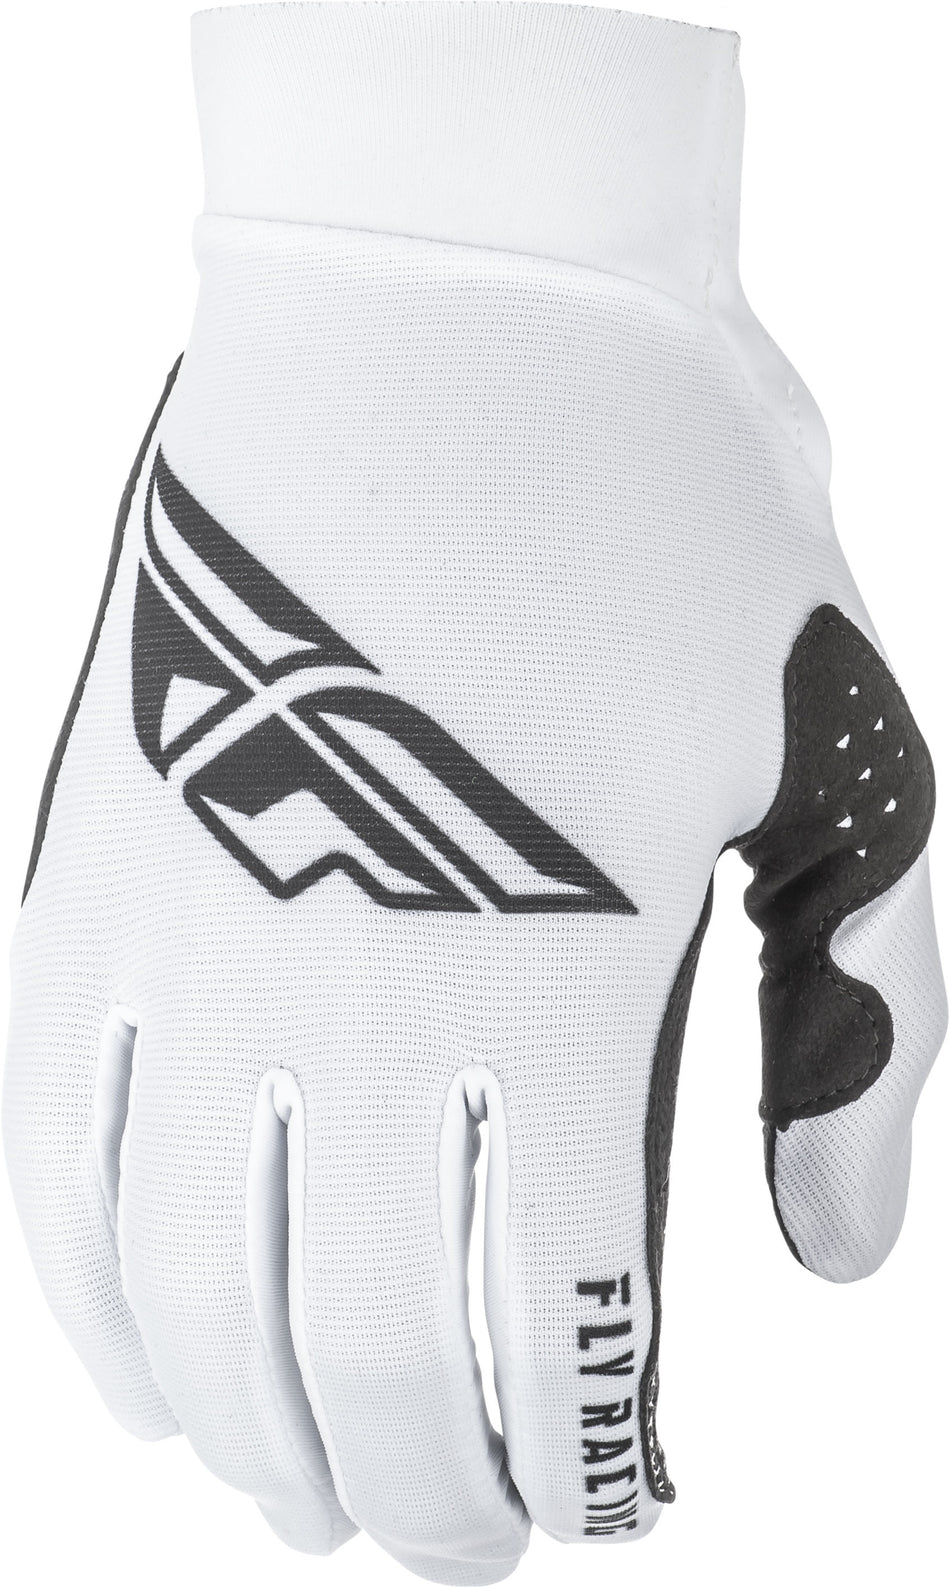 FLY RACING Pro Lite Gloves White Sz 10 372-81410